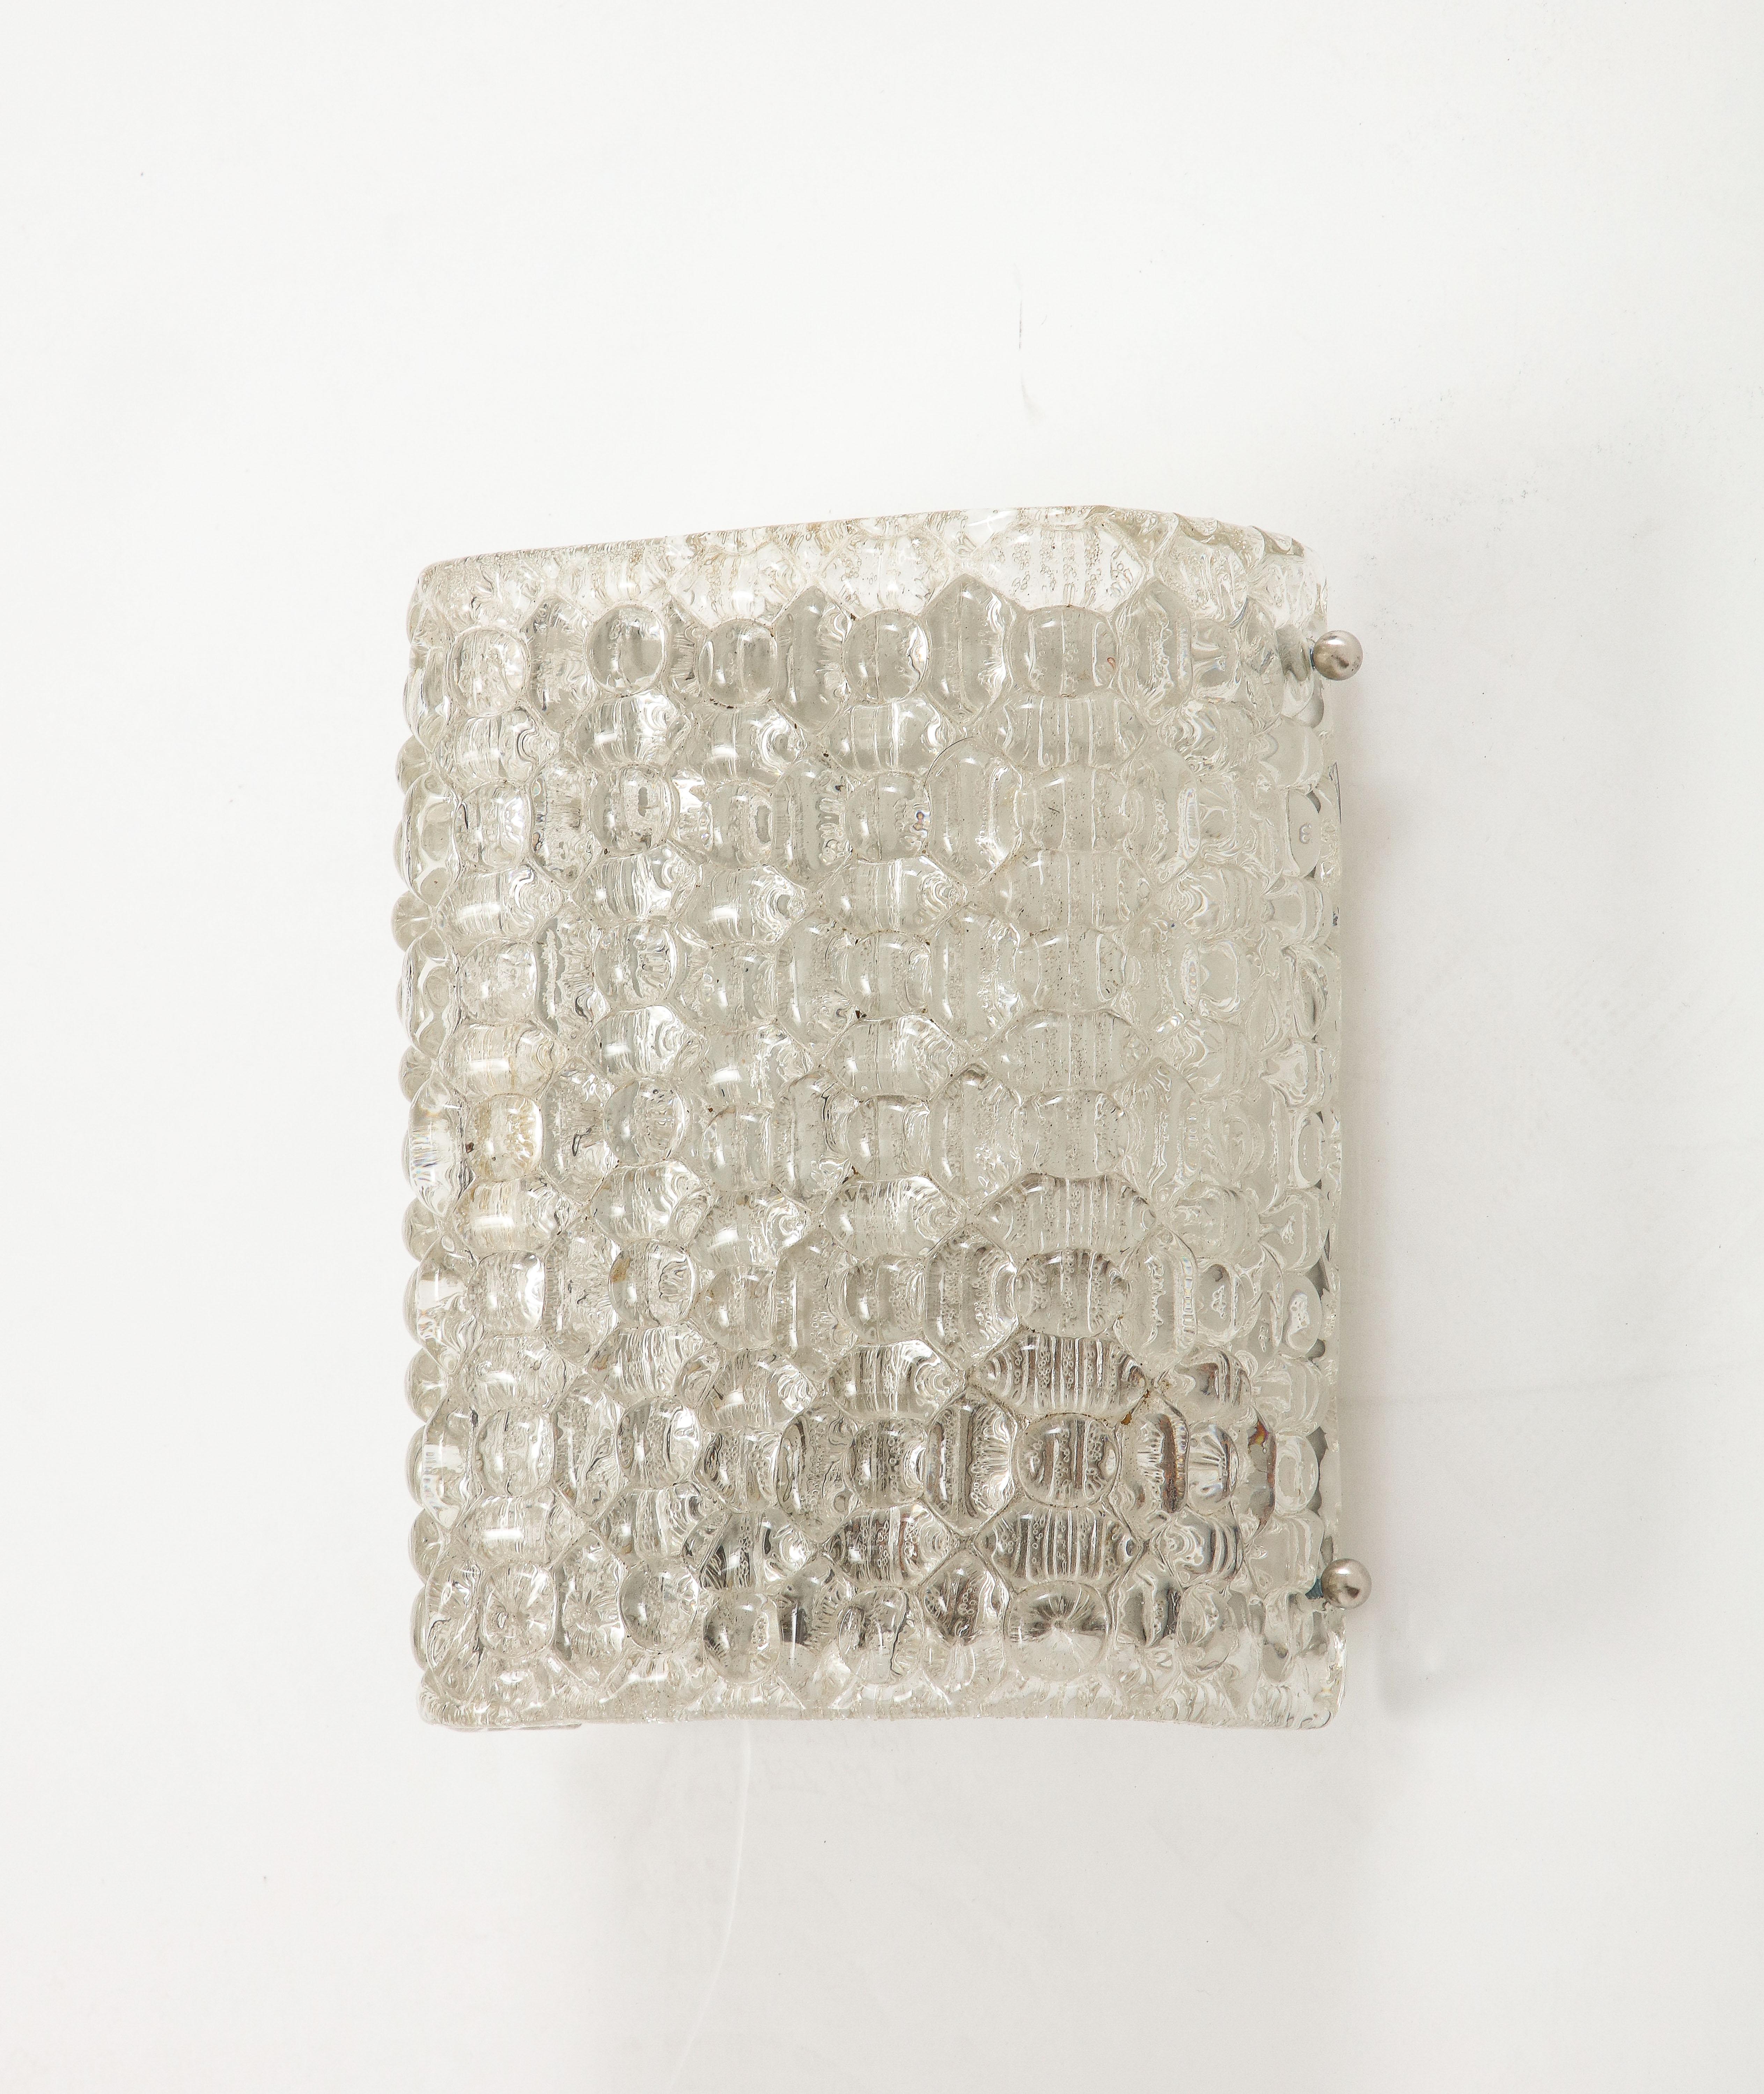 Single, Orrefors Bubbled Crystal Sconce In Good Condition For Sale In New York, NY